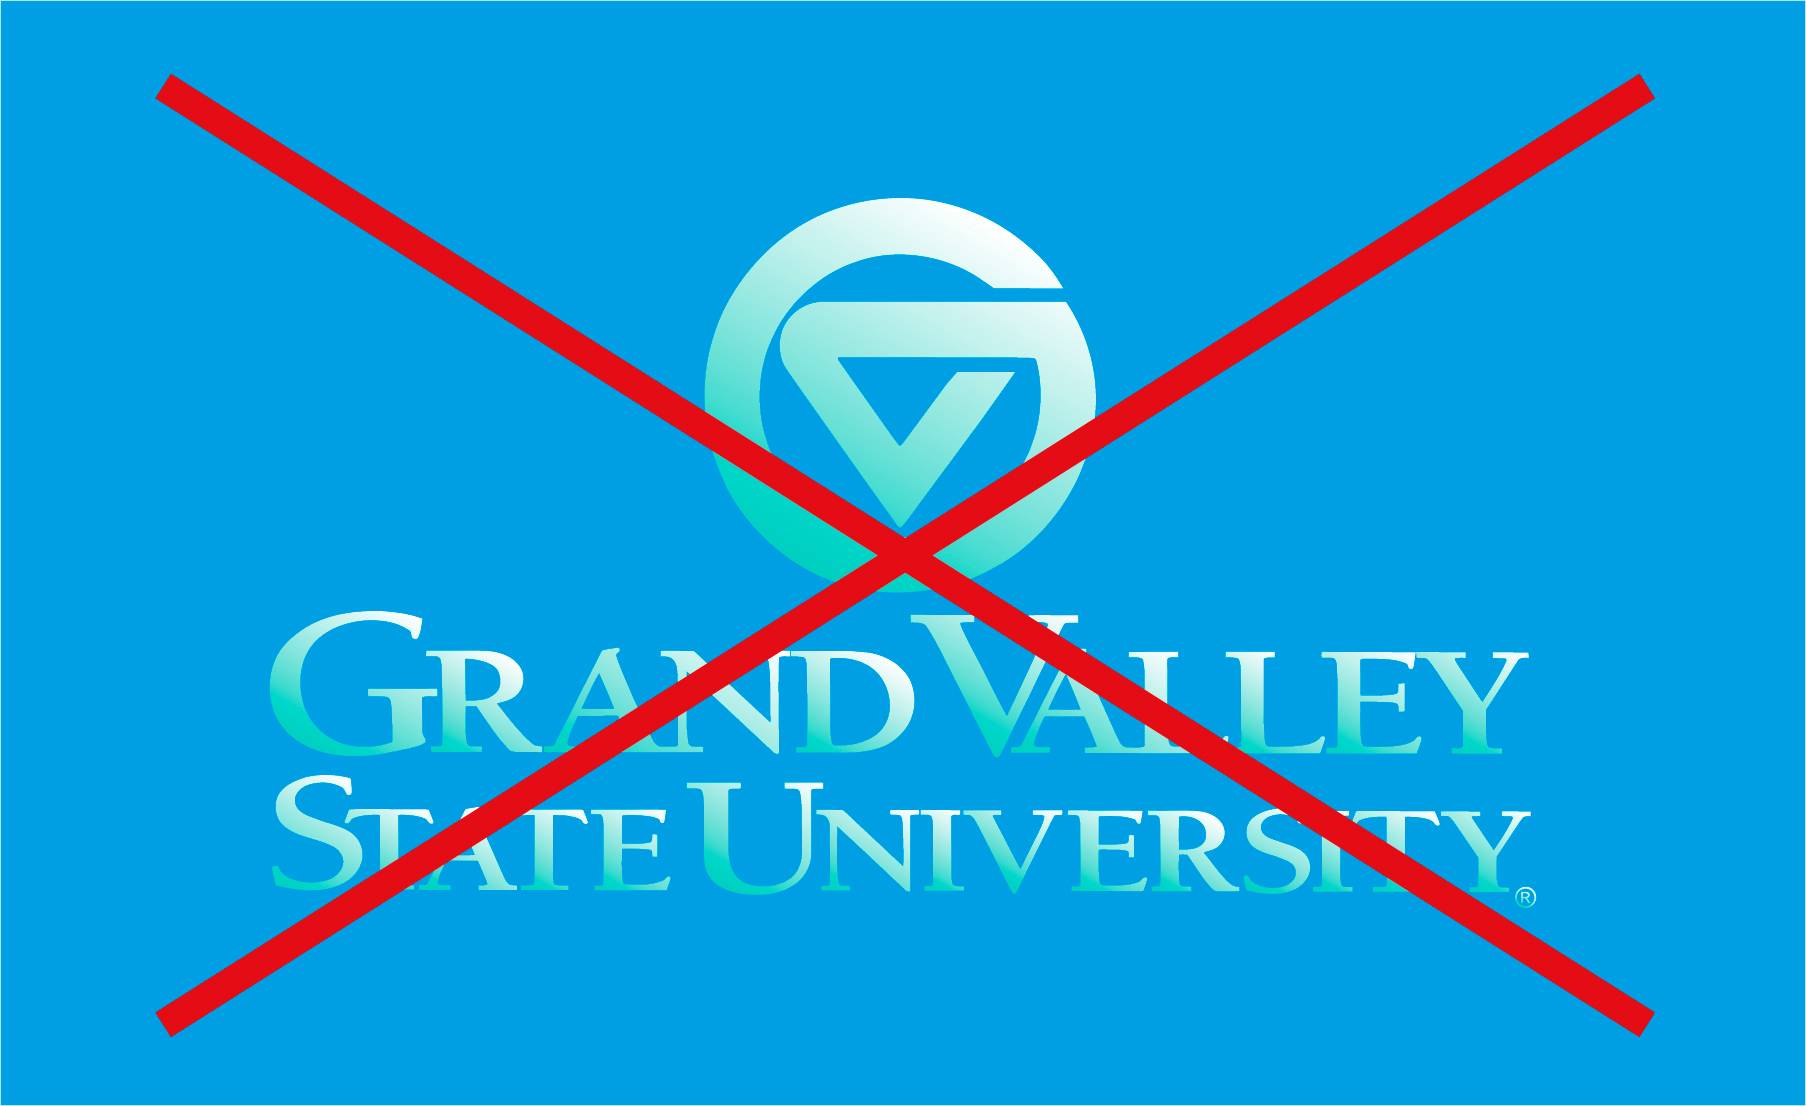 A Grand Valley logo with a teal and white gradient applied to it, overlaid by a red X.